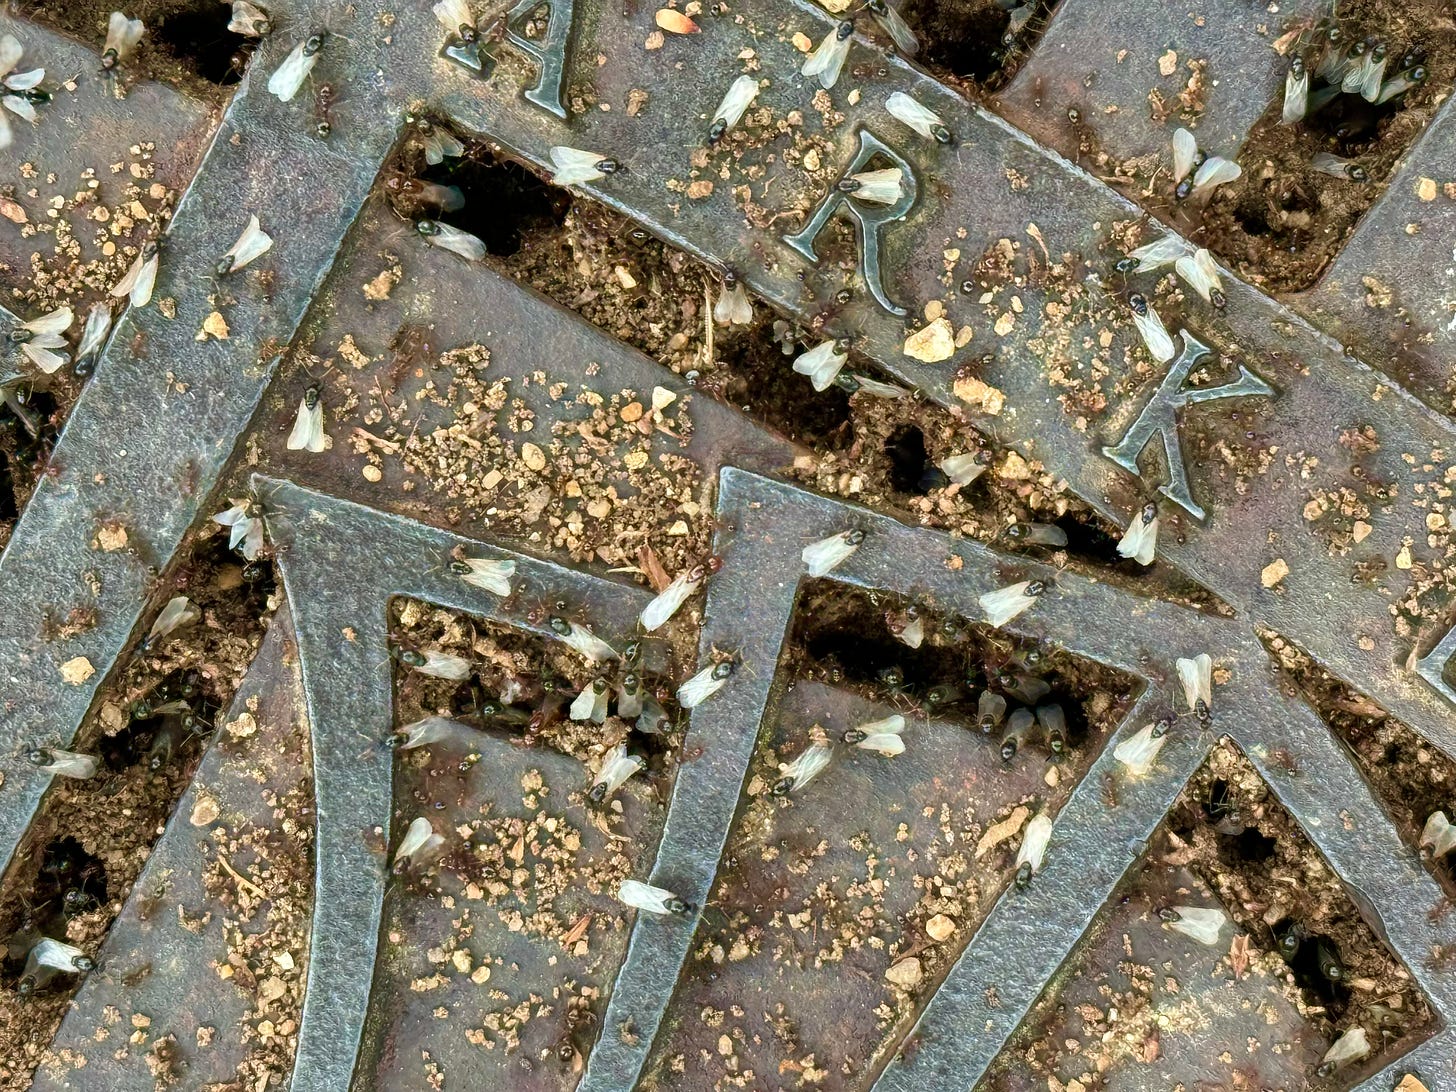 Winged ants preparing to fly, gathered on an iron grate